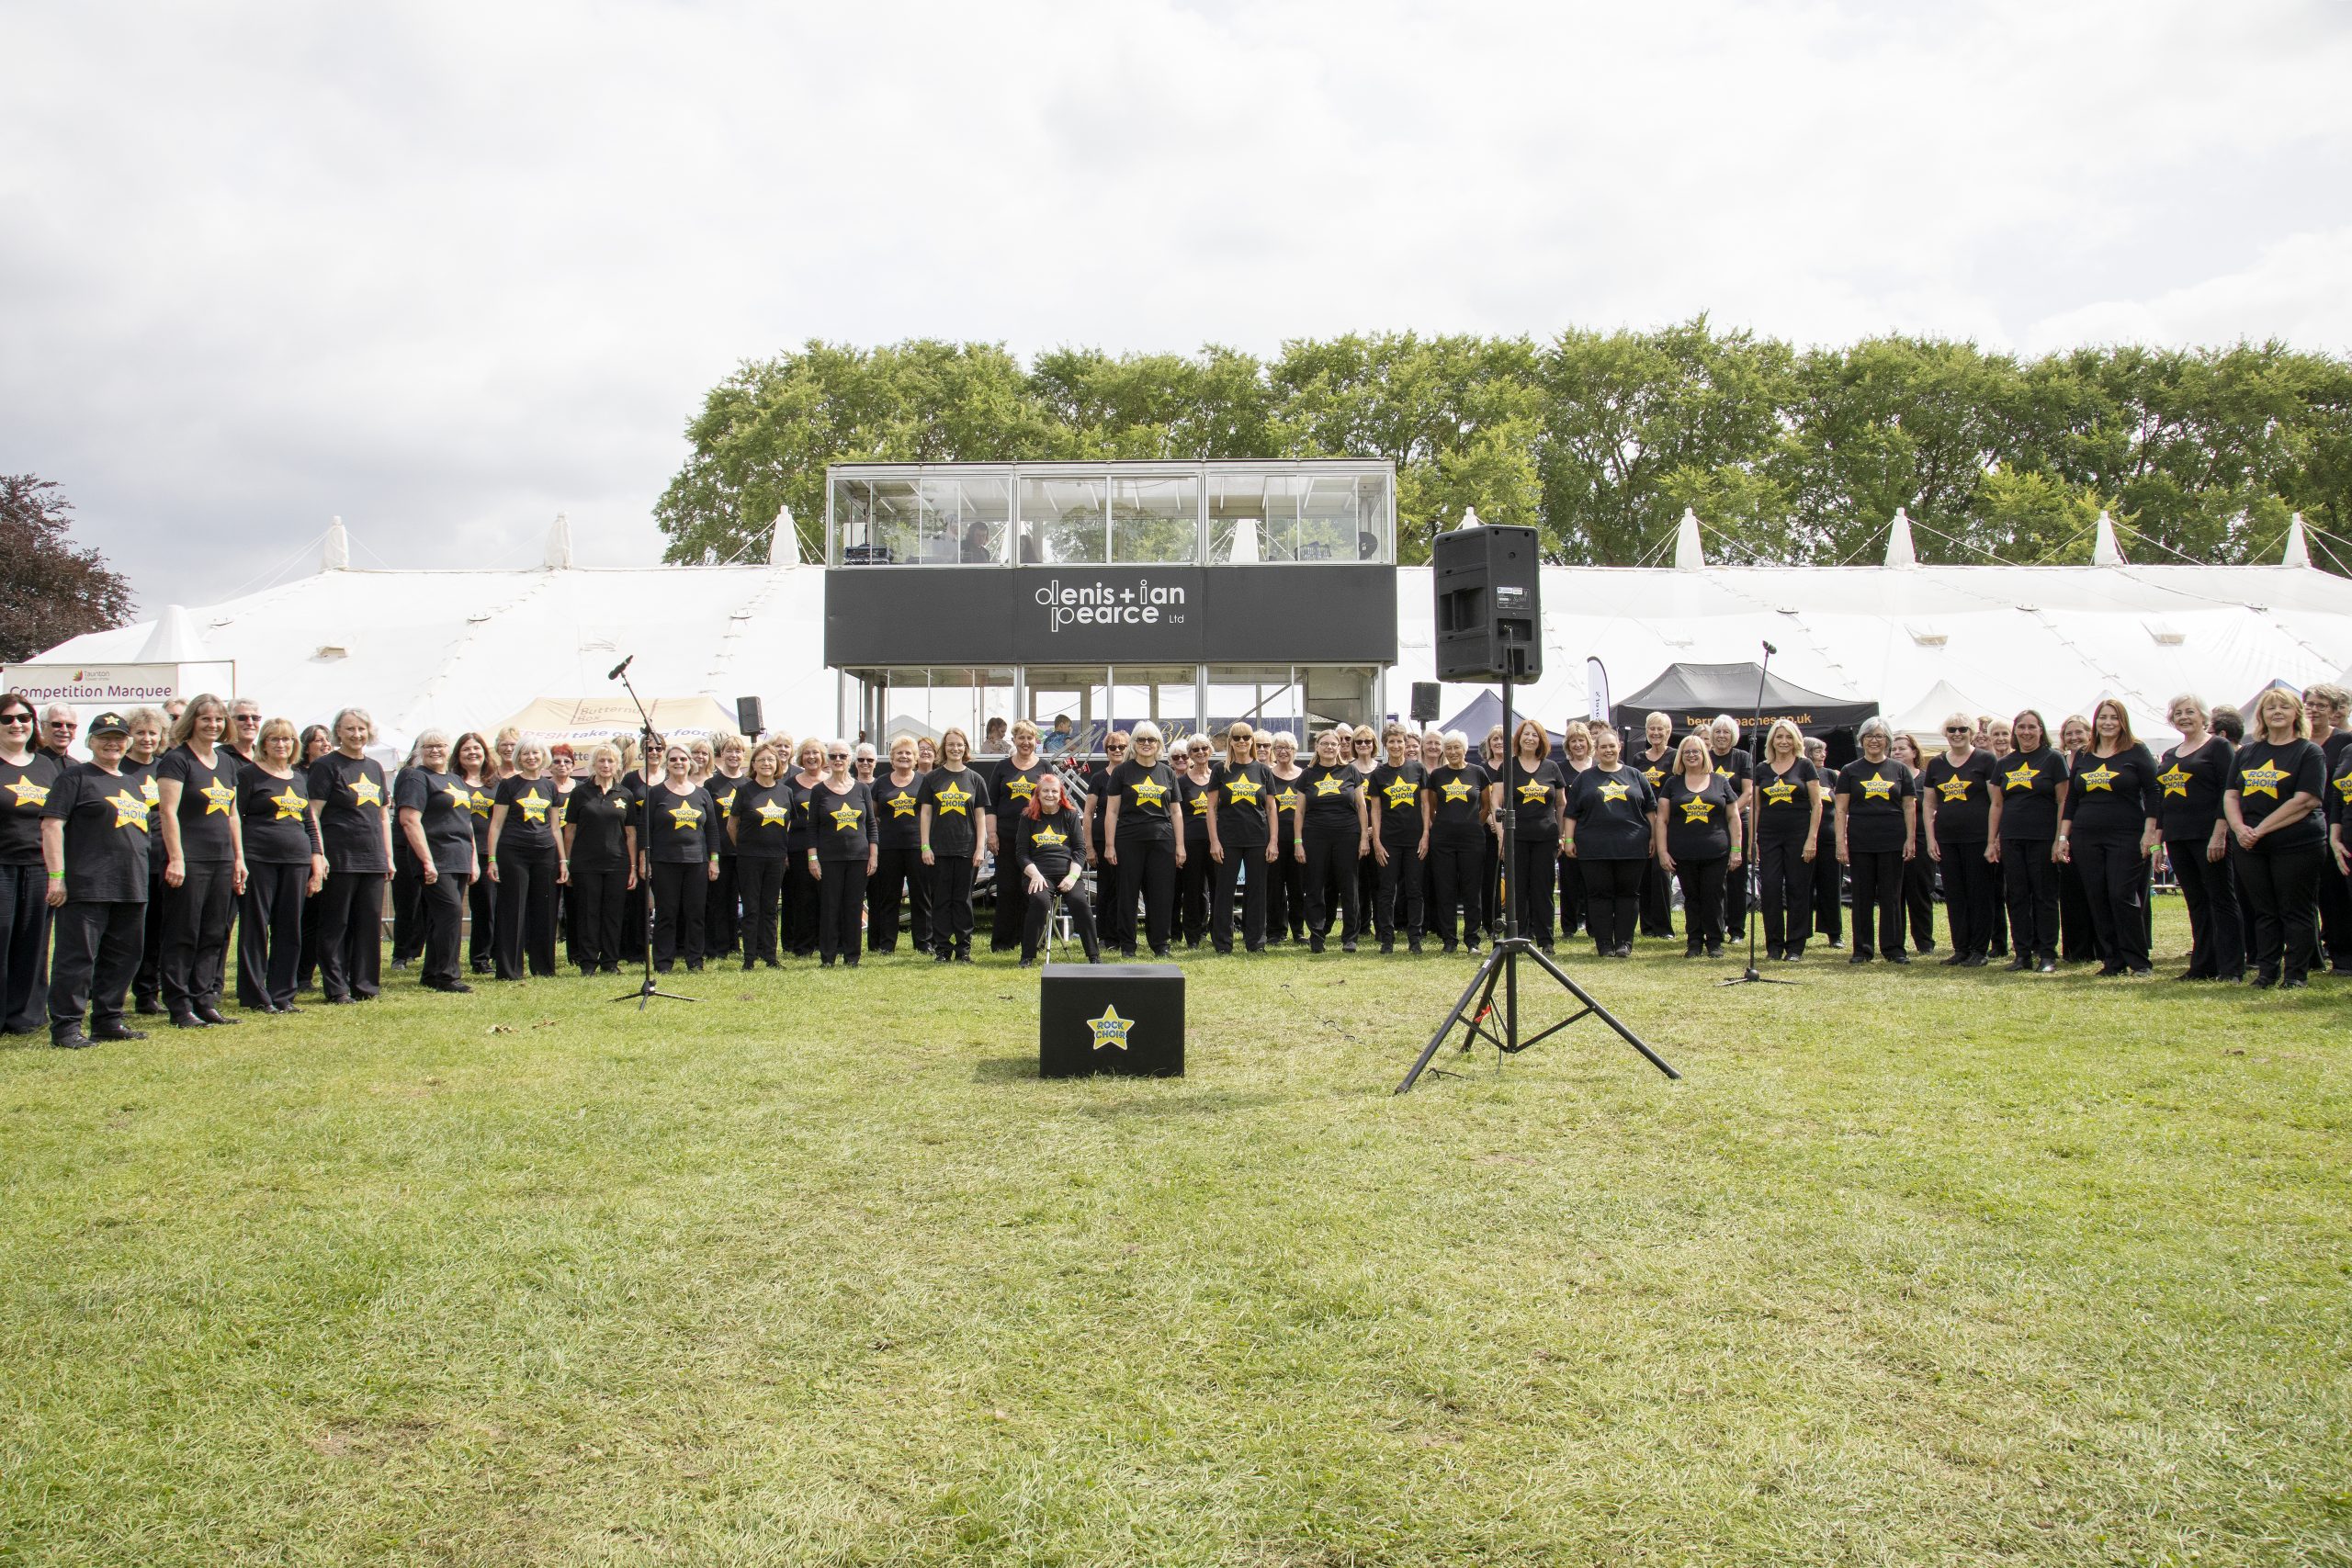 Rock Choir performing in the arena